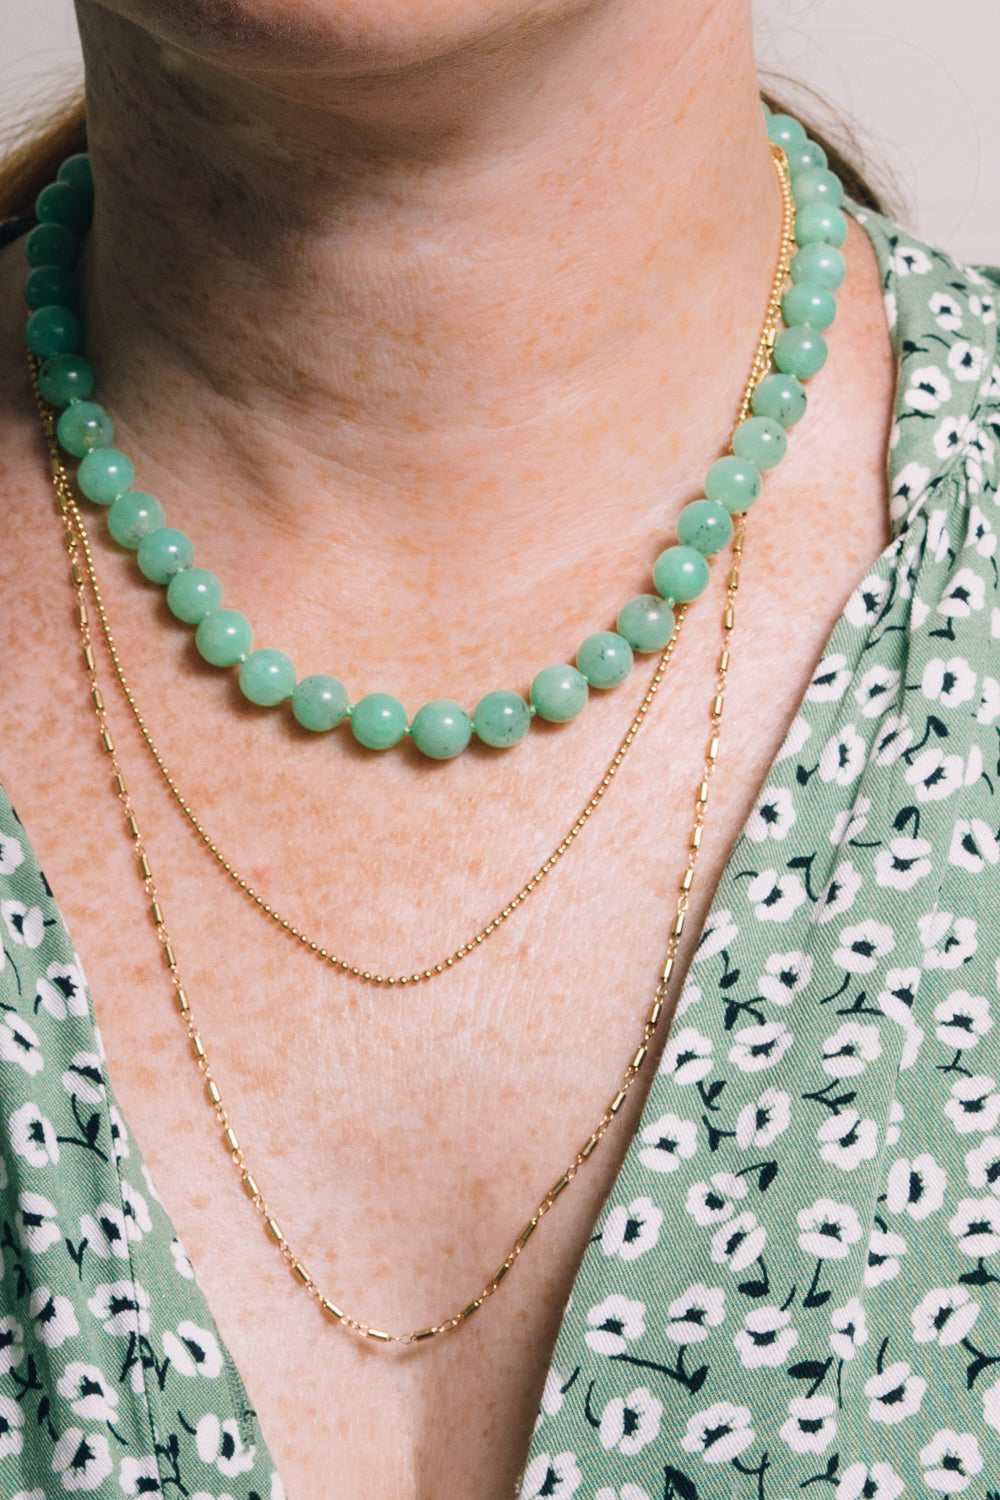 chrysoprase strung bead necklace with layering necklaces on model